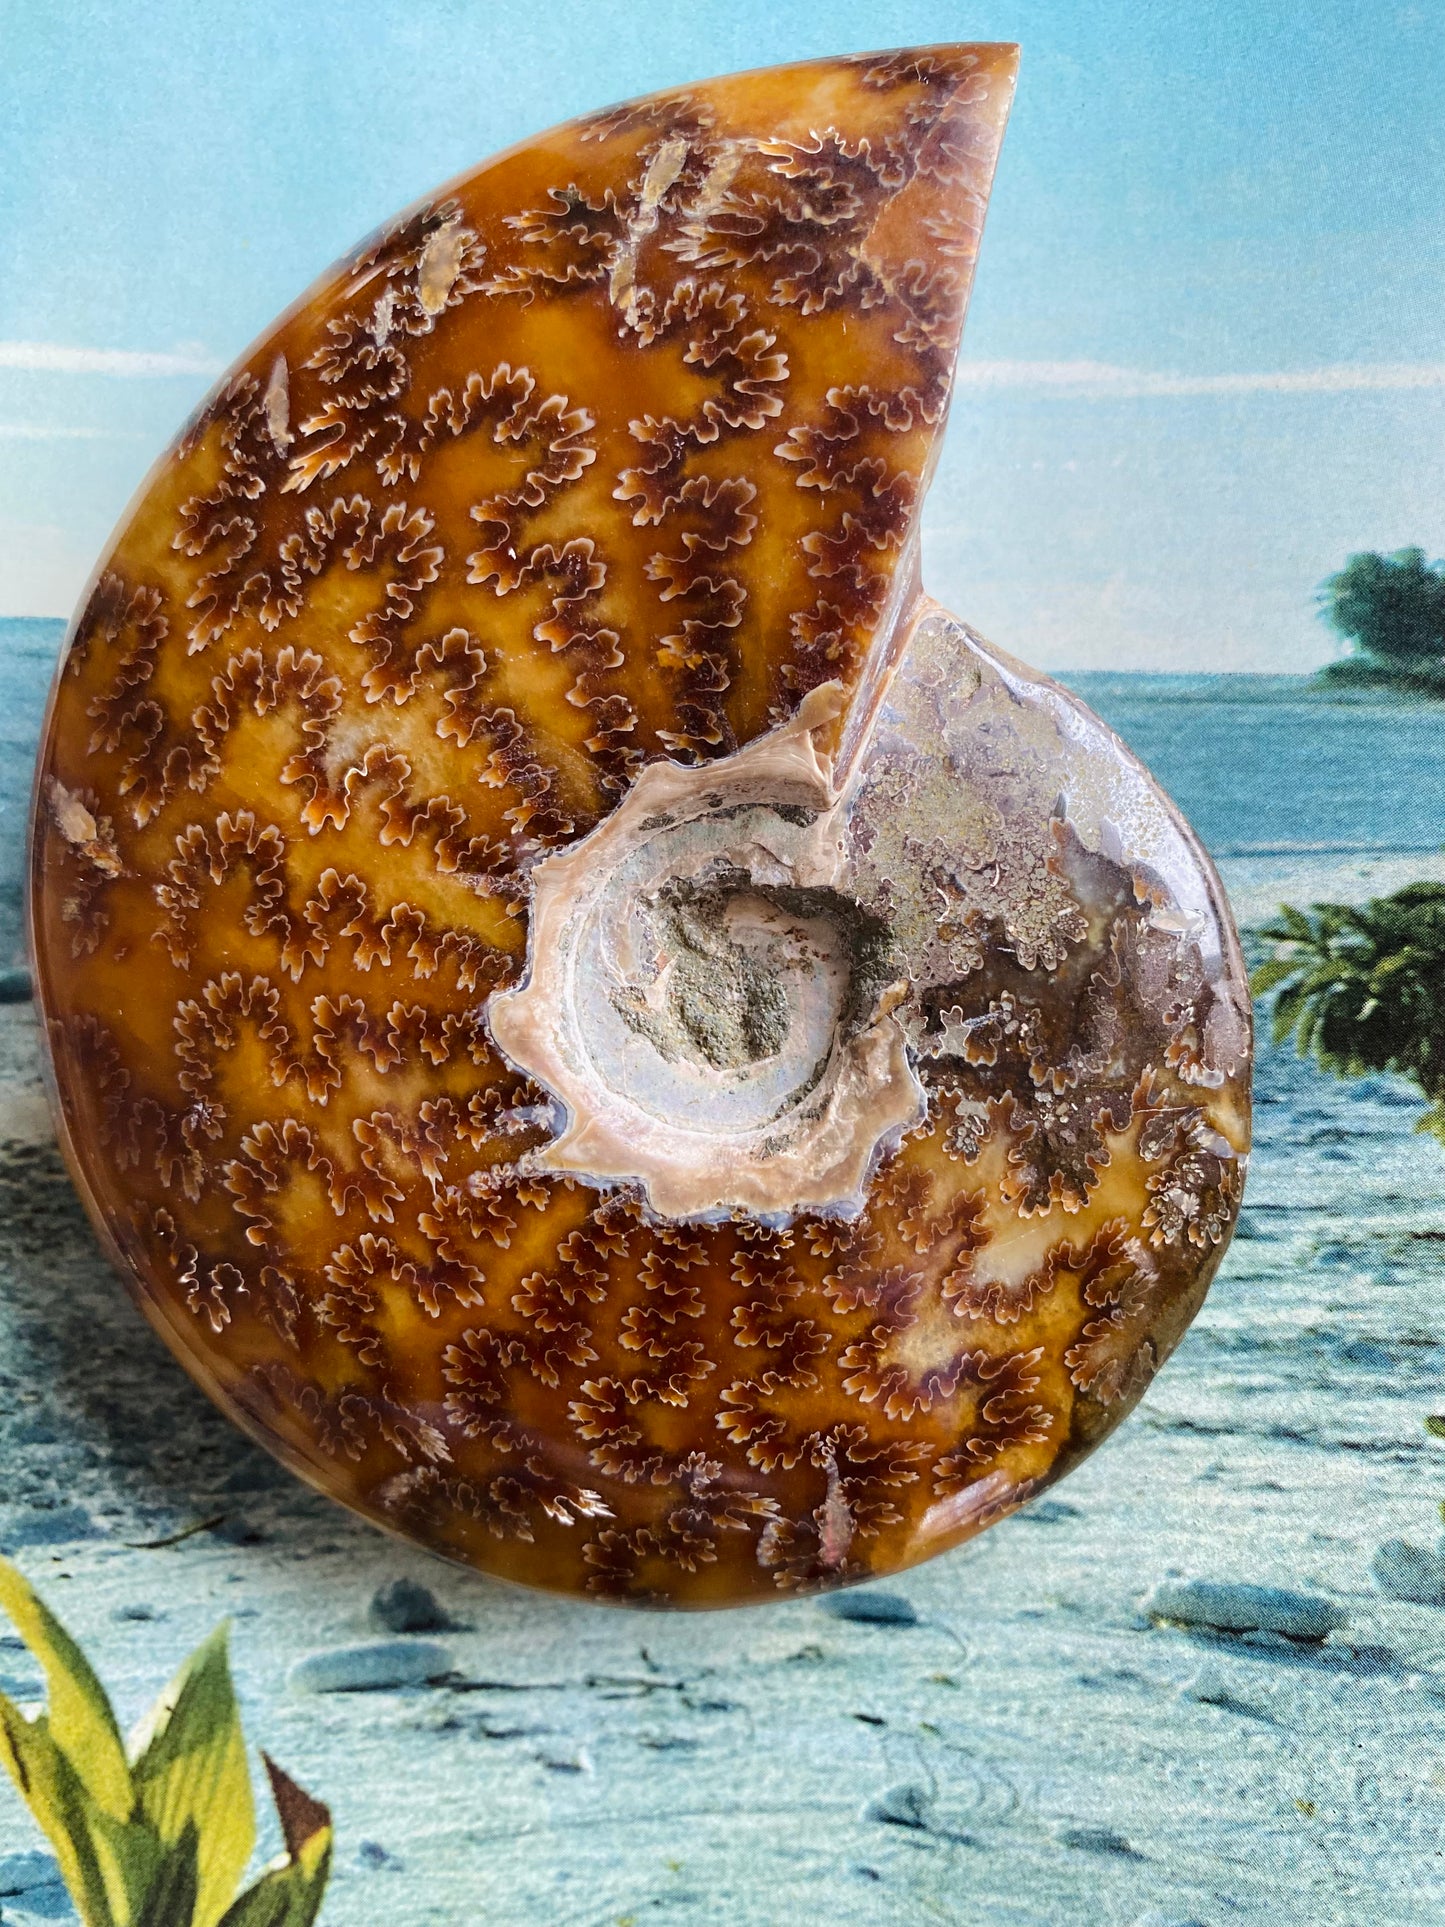 Polished Ammonite Fossil 5"x4" - Moon Room Shop and Wellness